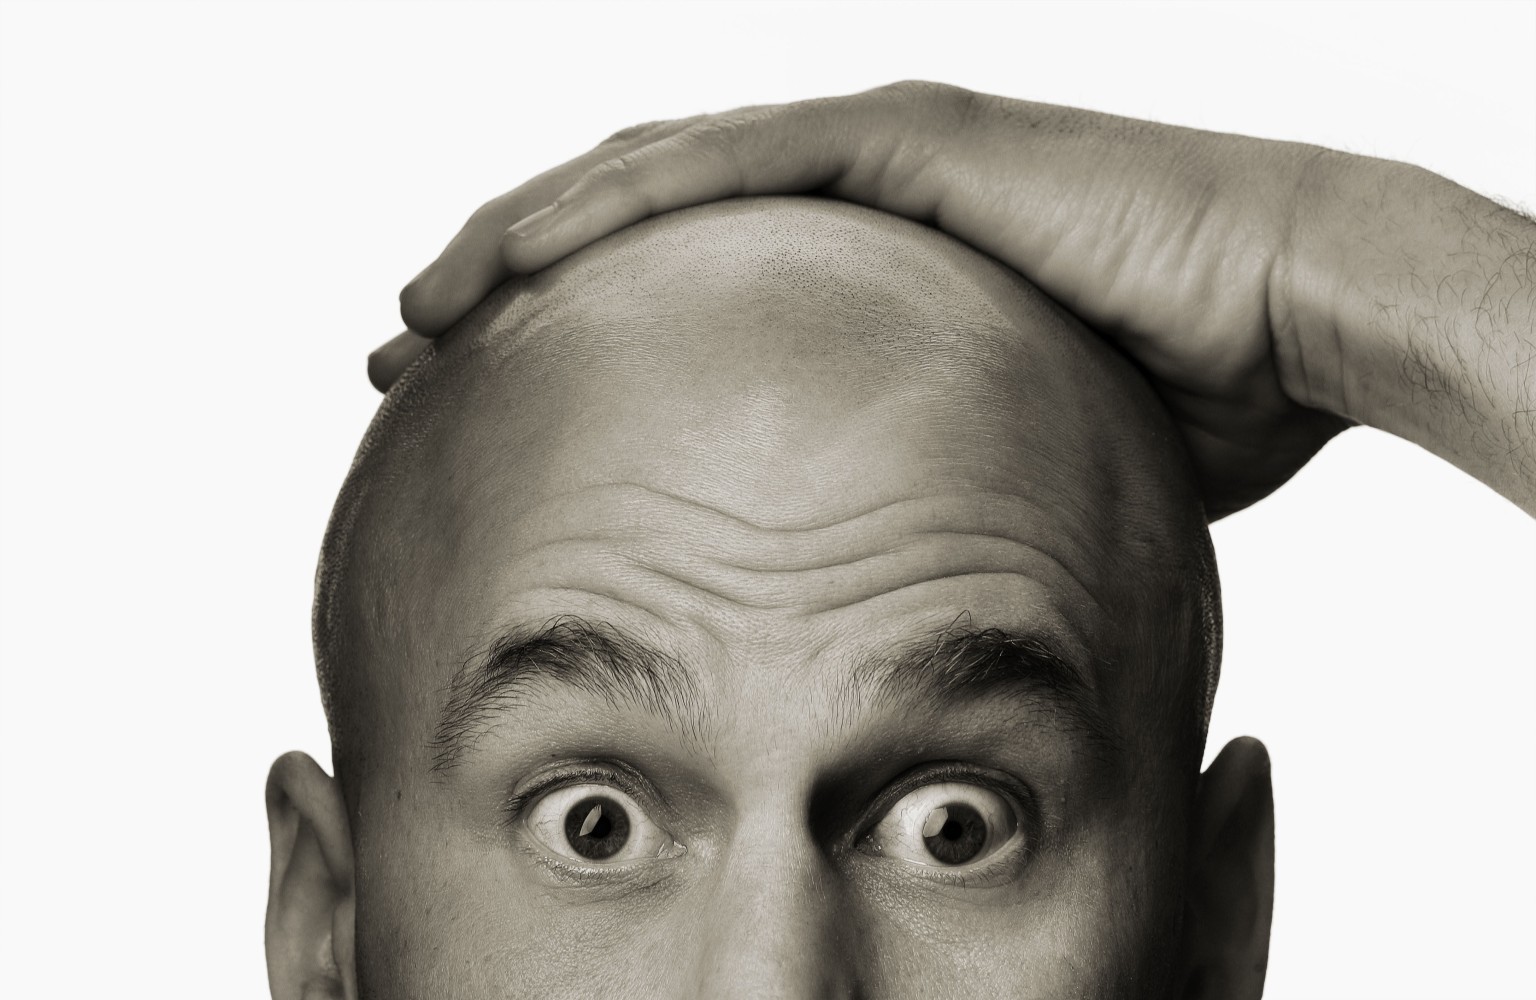 Curing baldness may just be about having enough pluck